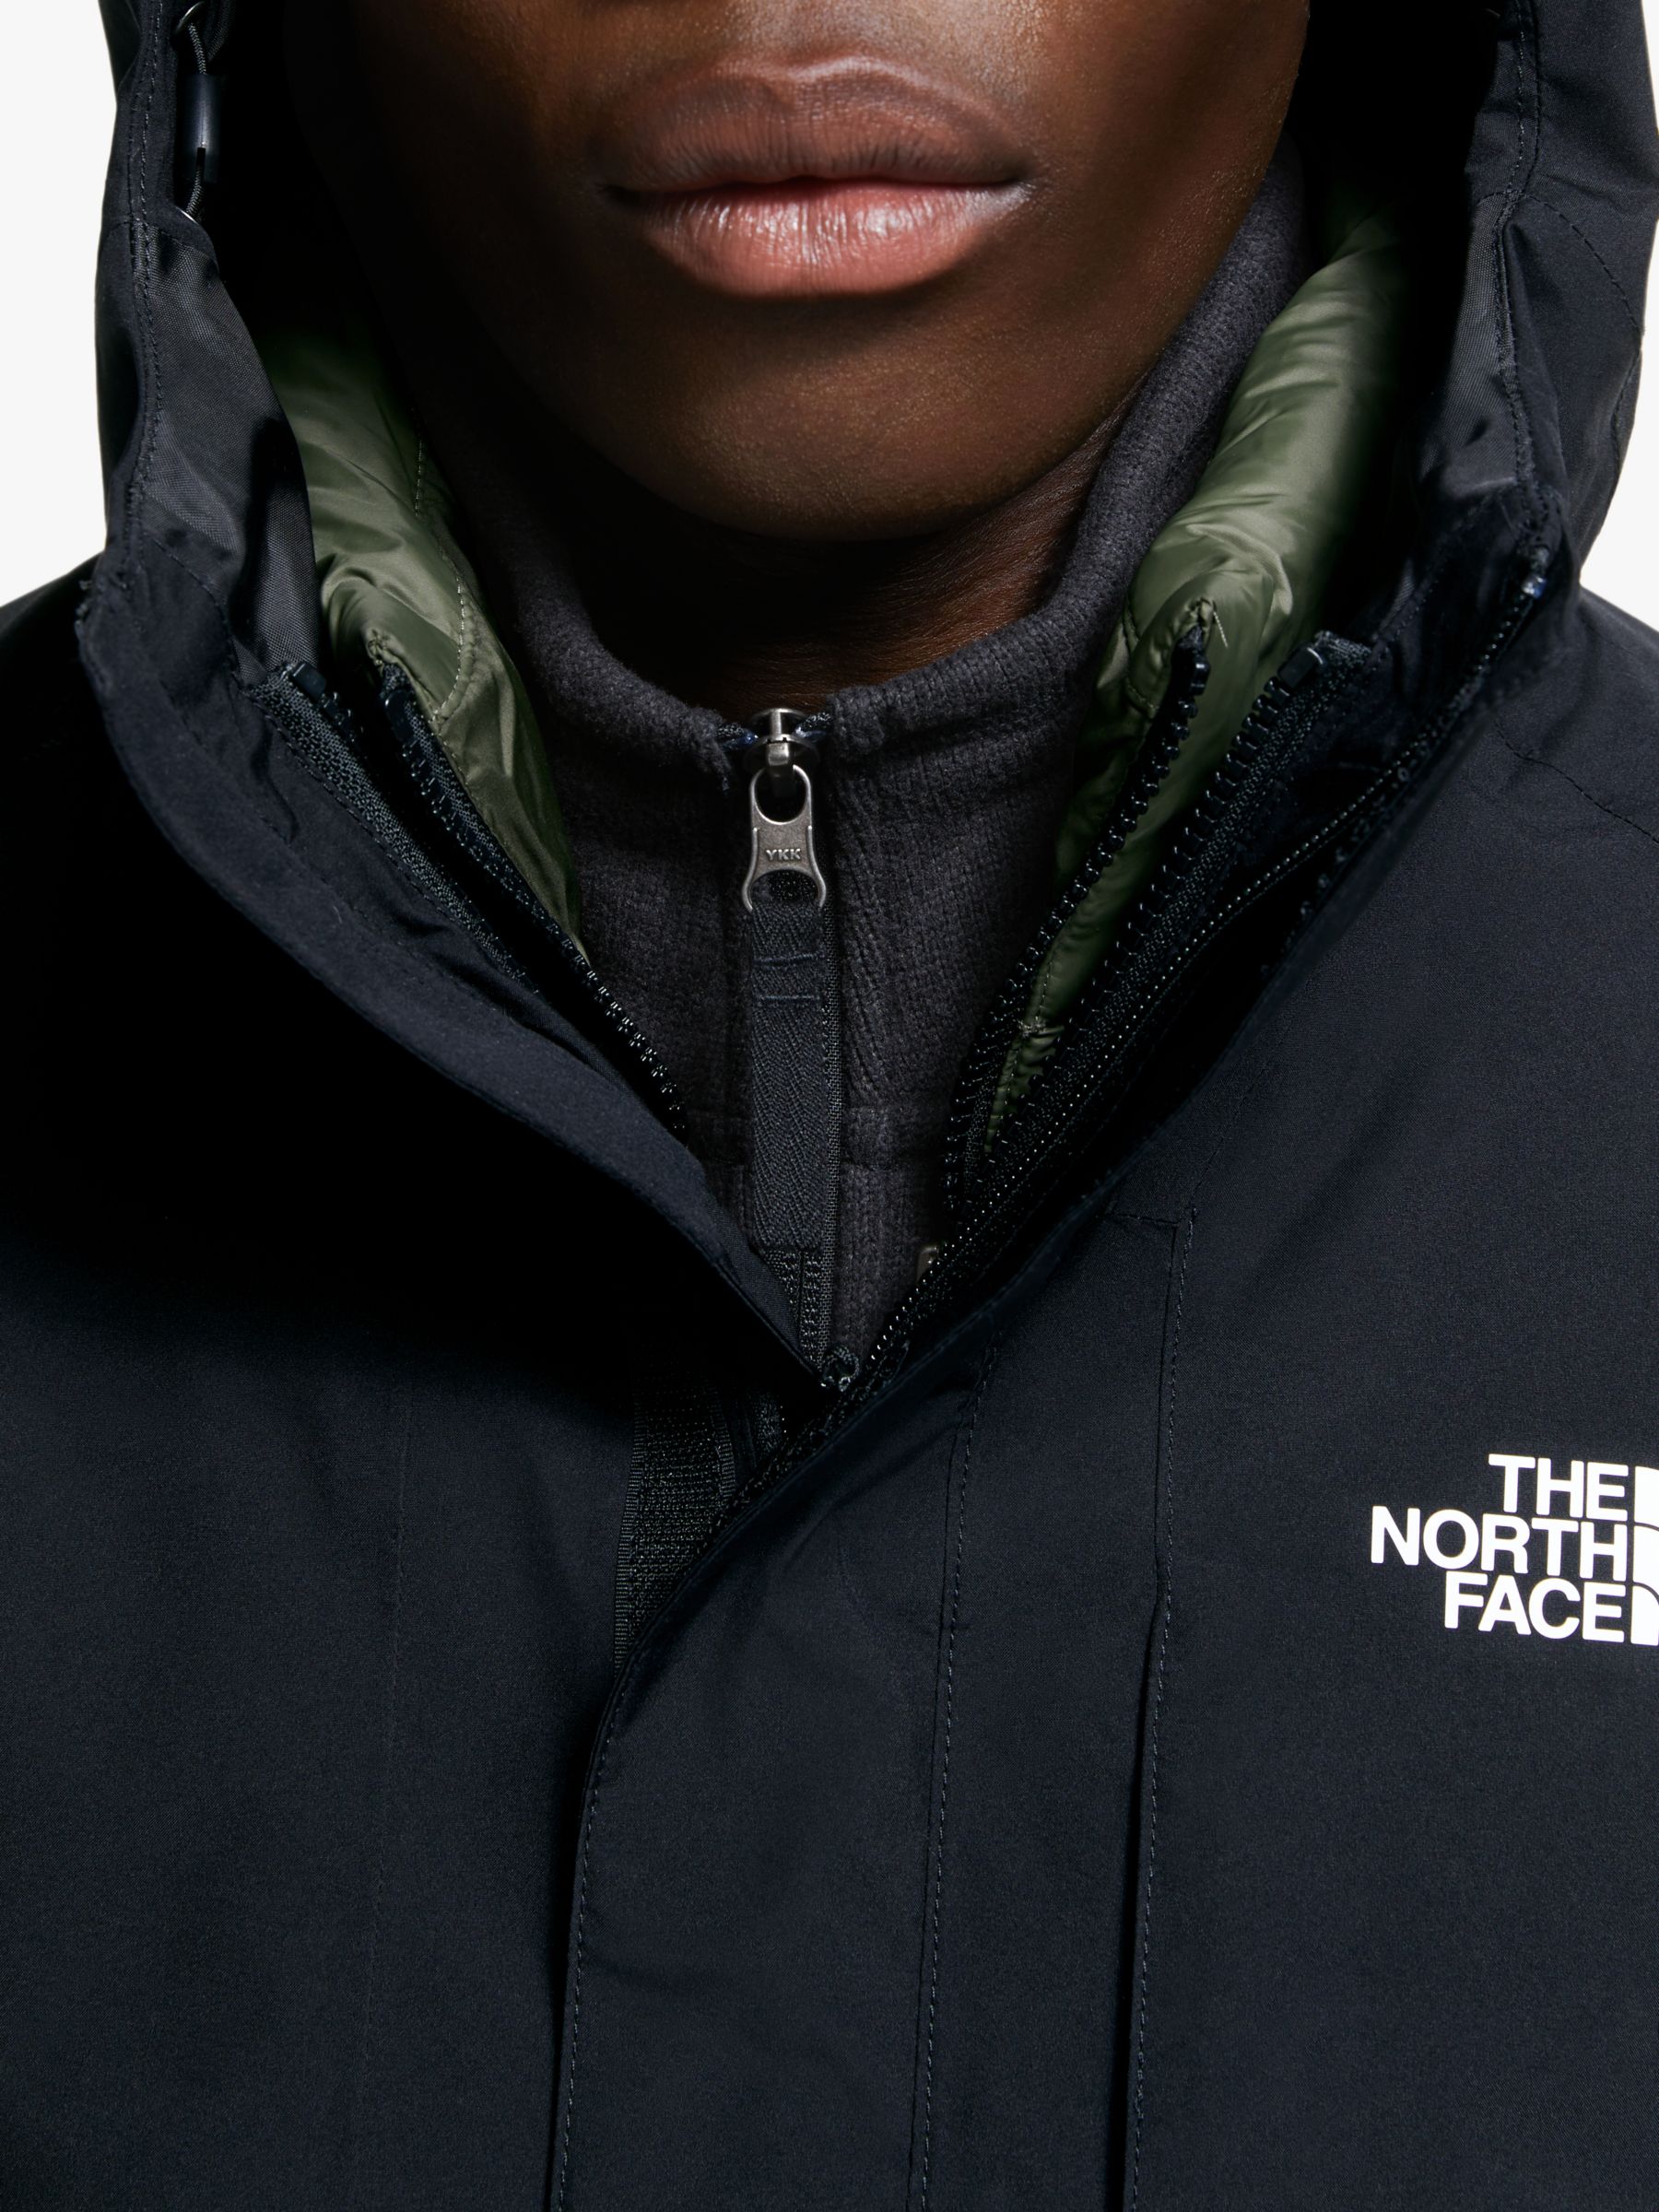 the north face gore tex triclimate